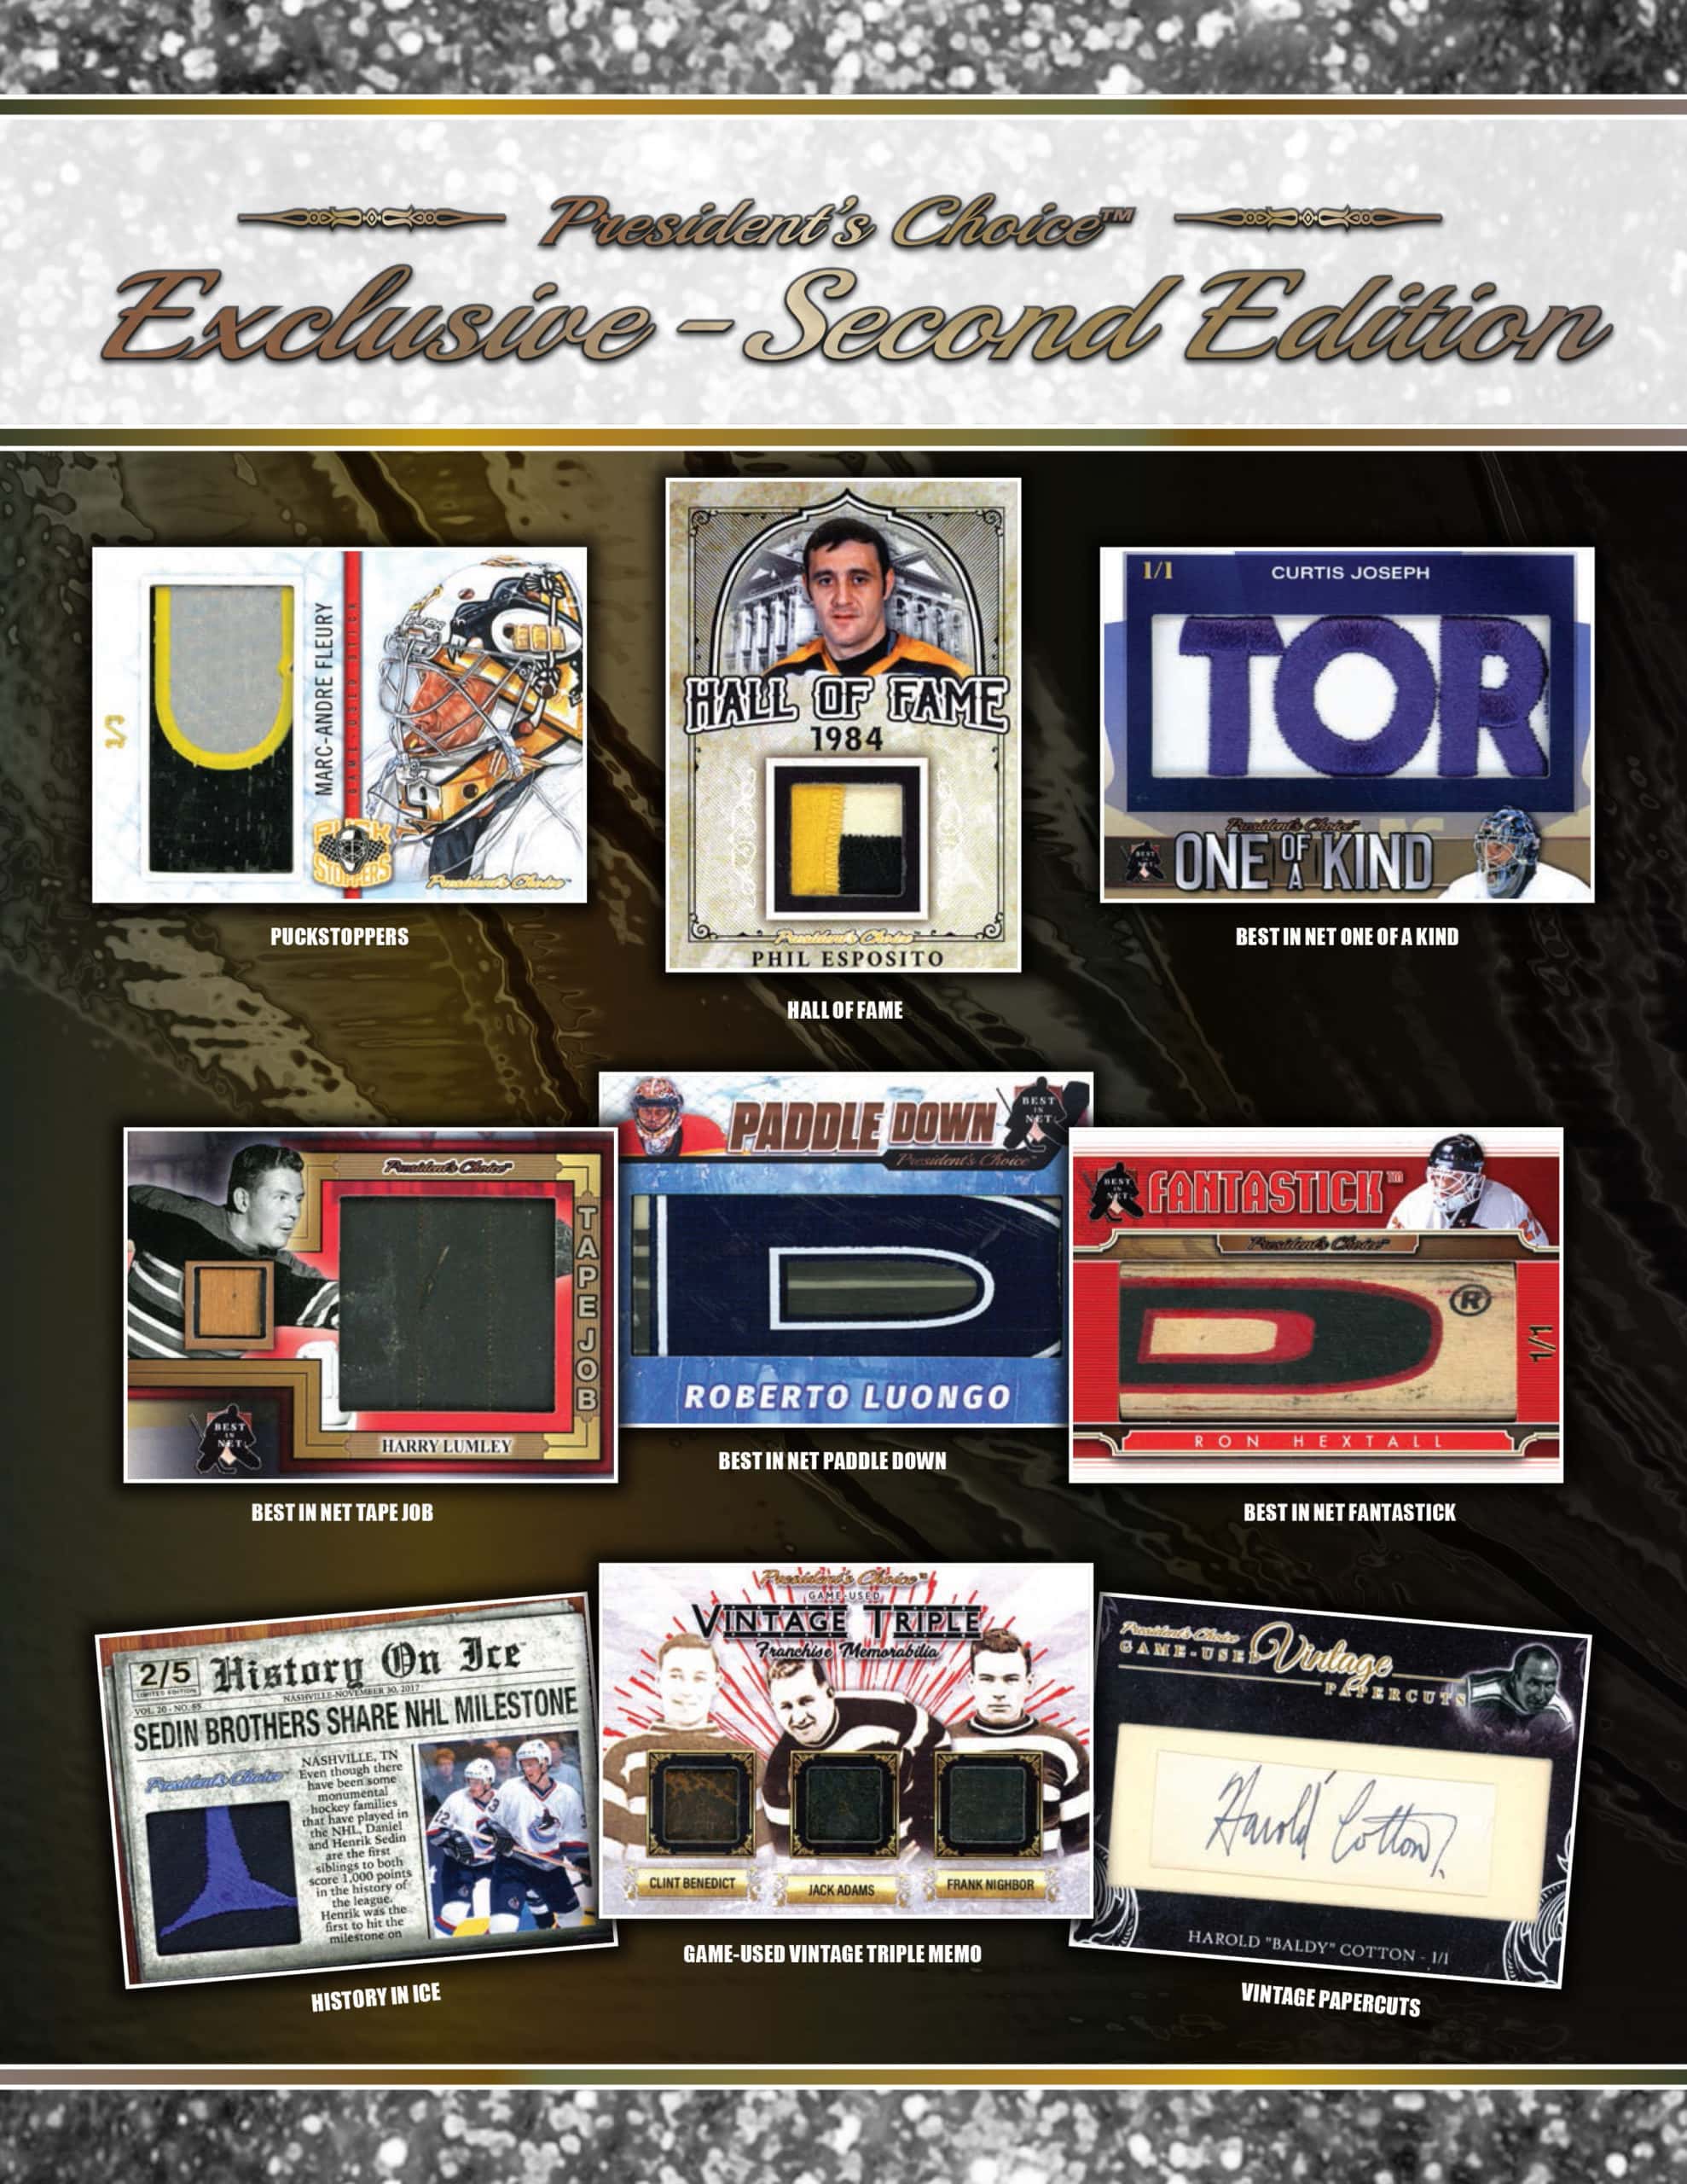 2020-21 PRESIDENT’S CHOICE EXCLUSIVE SECOND EDITION BOX